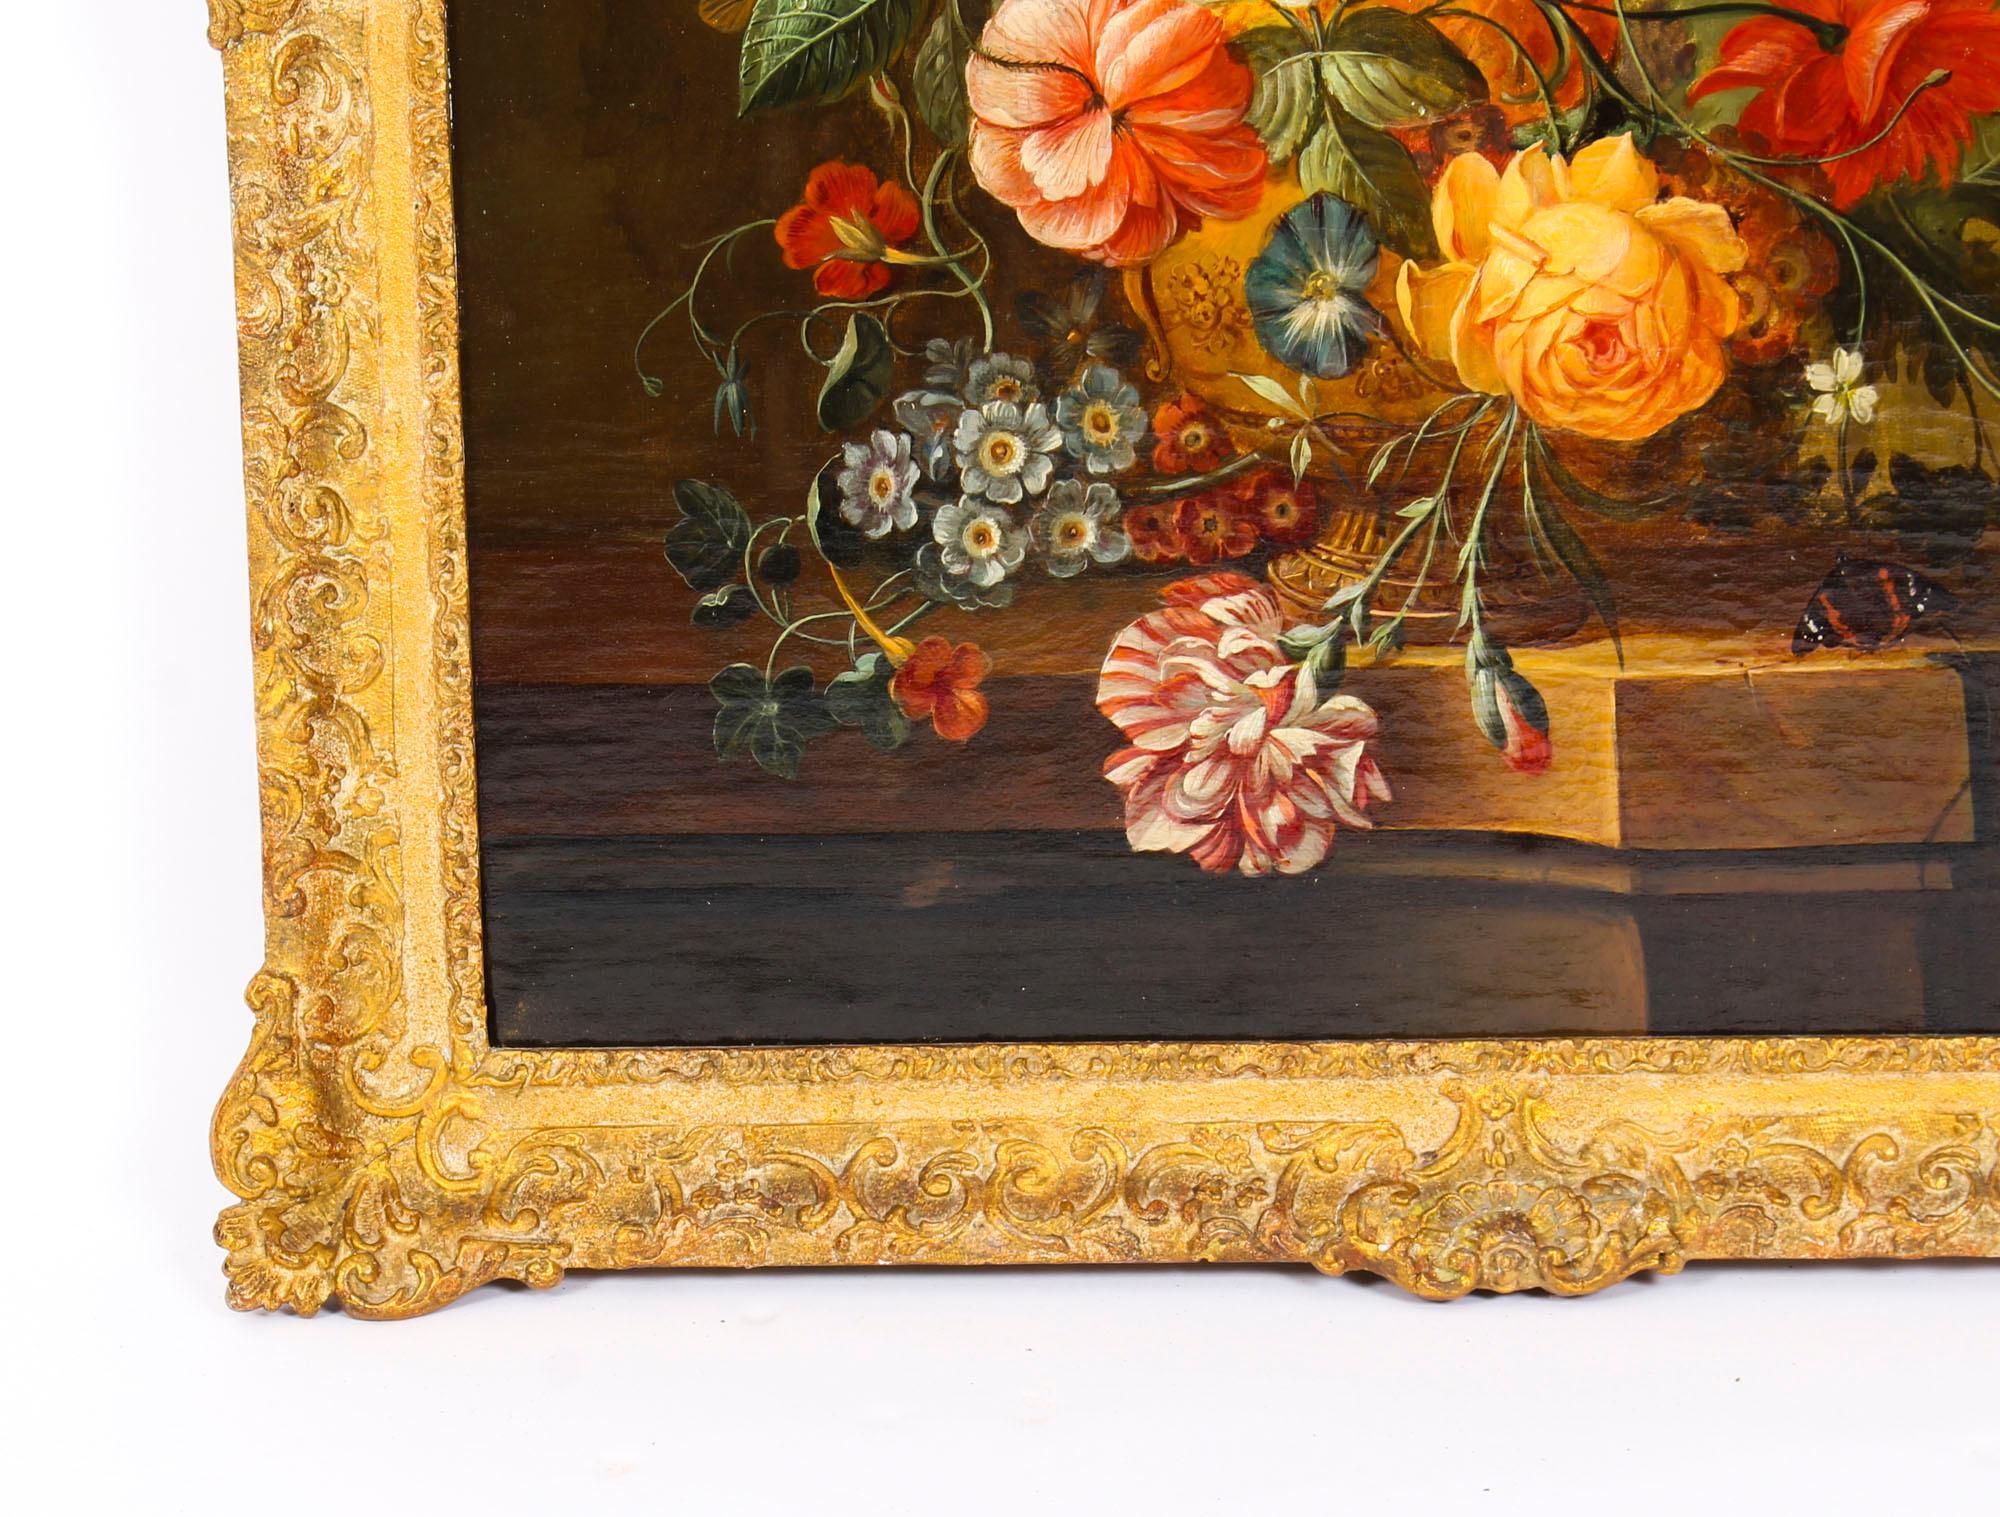 Canvas Antique Dutch School Floral Still Life Oil Painting Framed, Late 18th Century